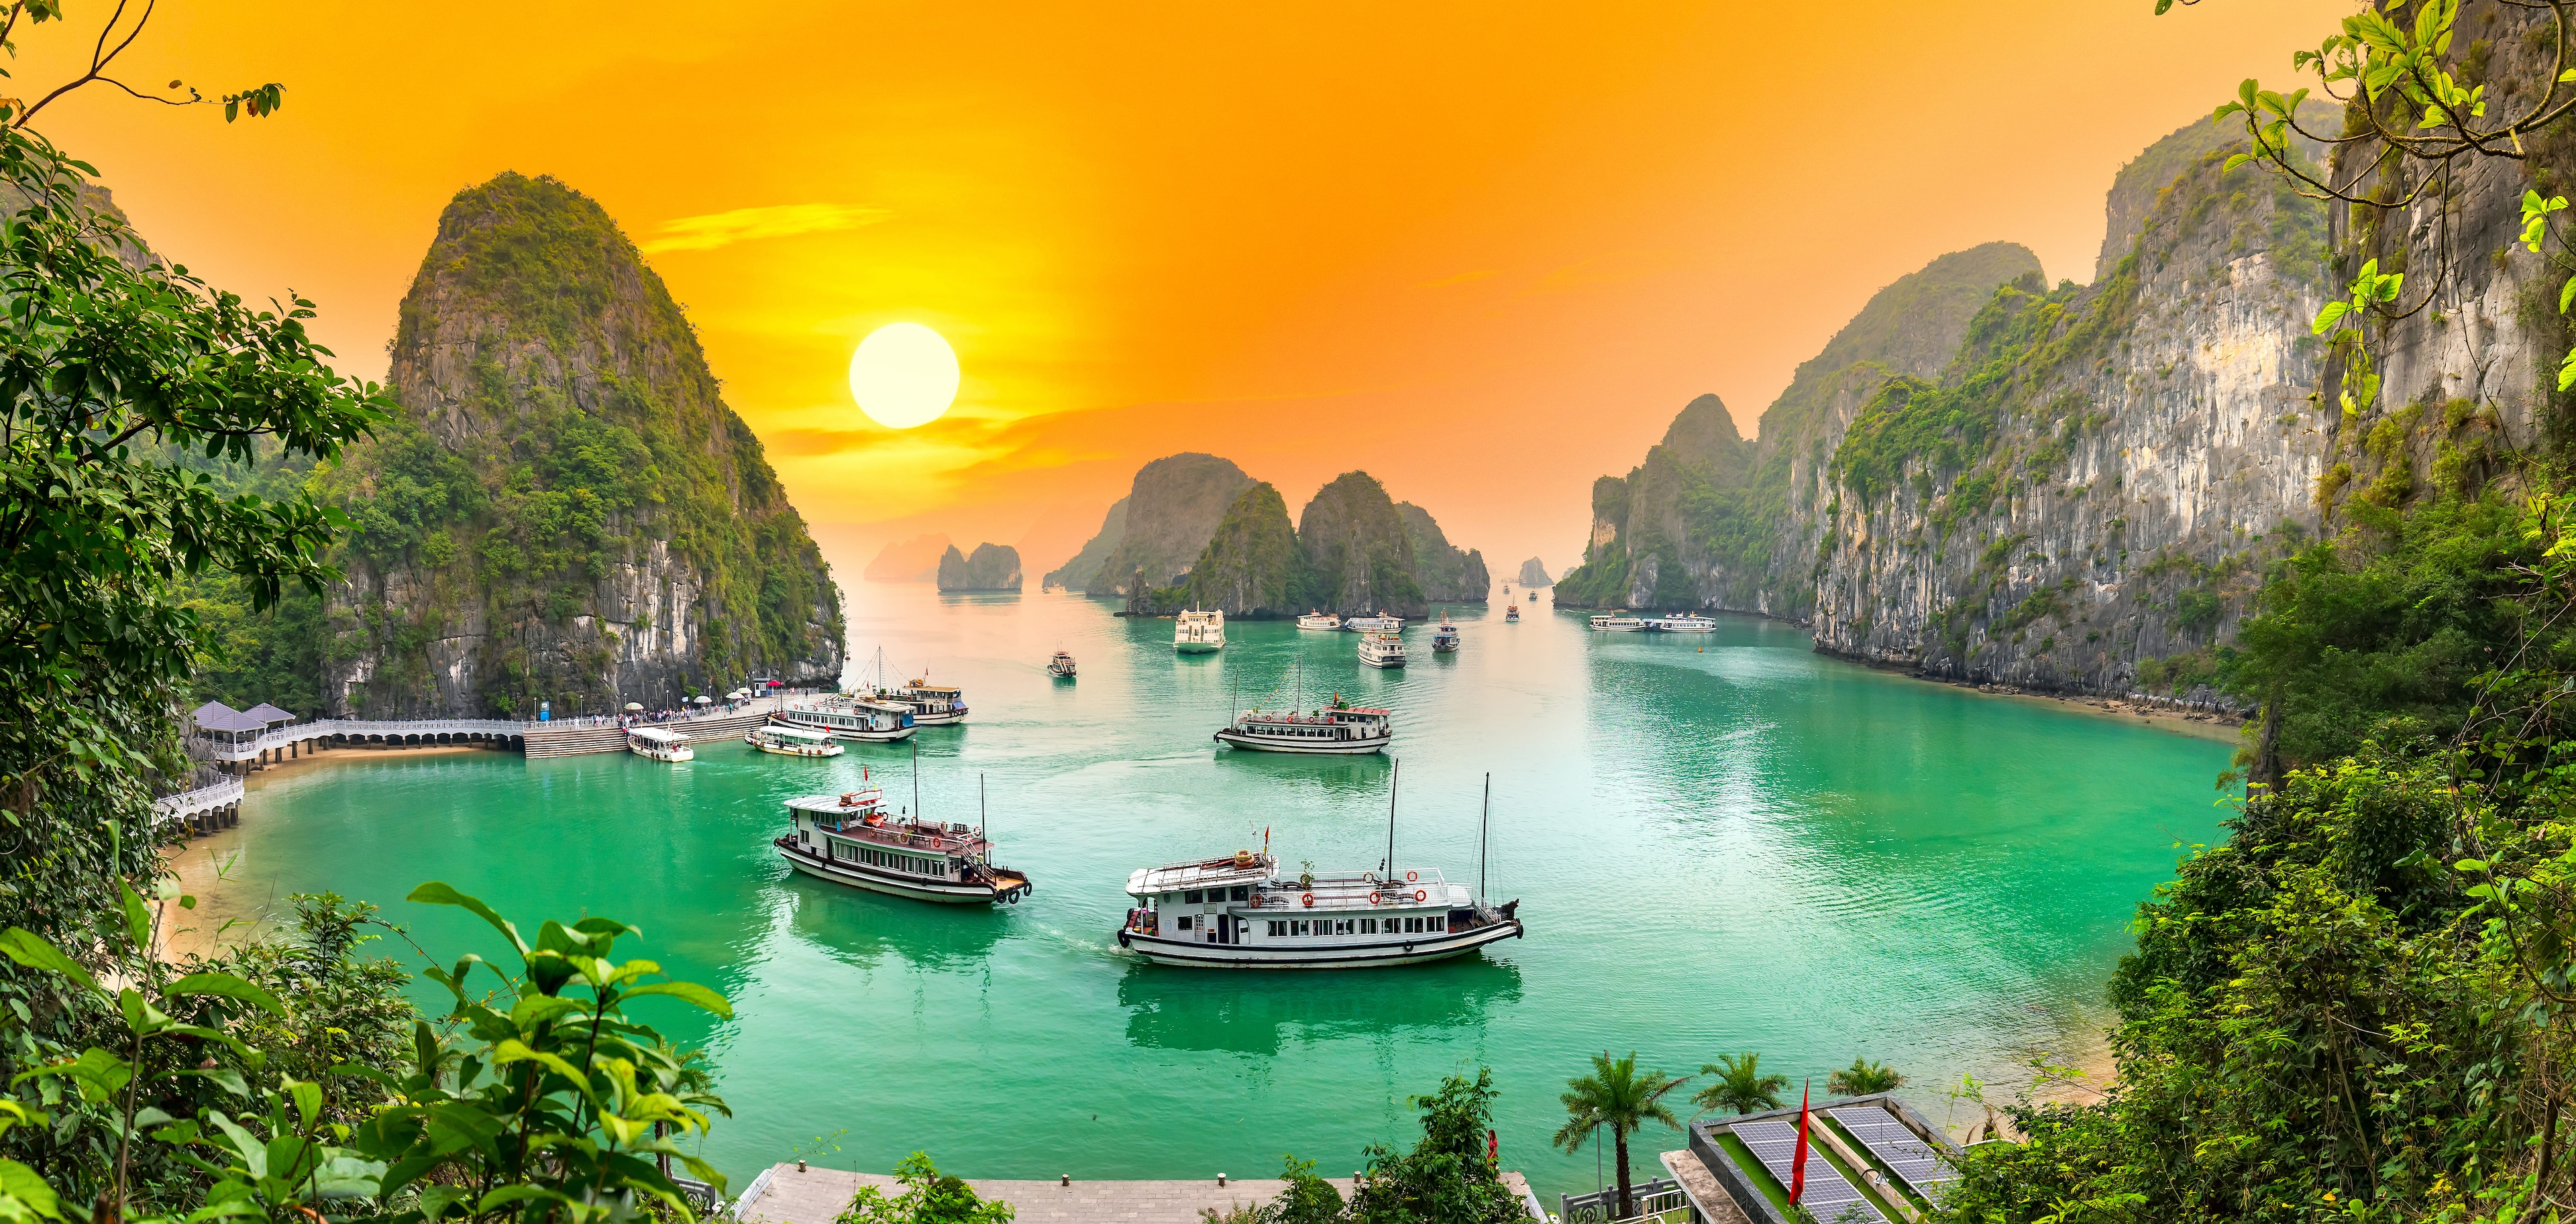 Why Is Halong Bay the Crown Jewel of Vietnam's Landscape?